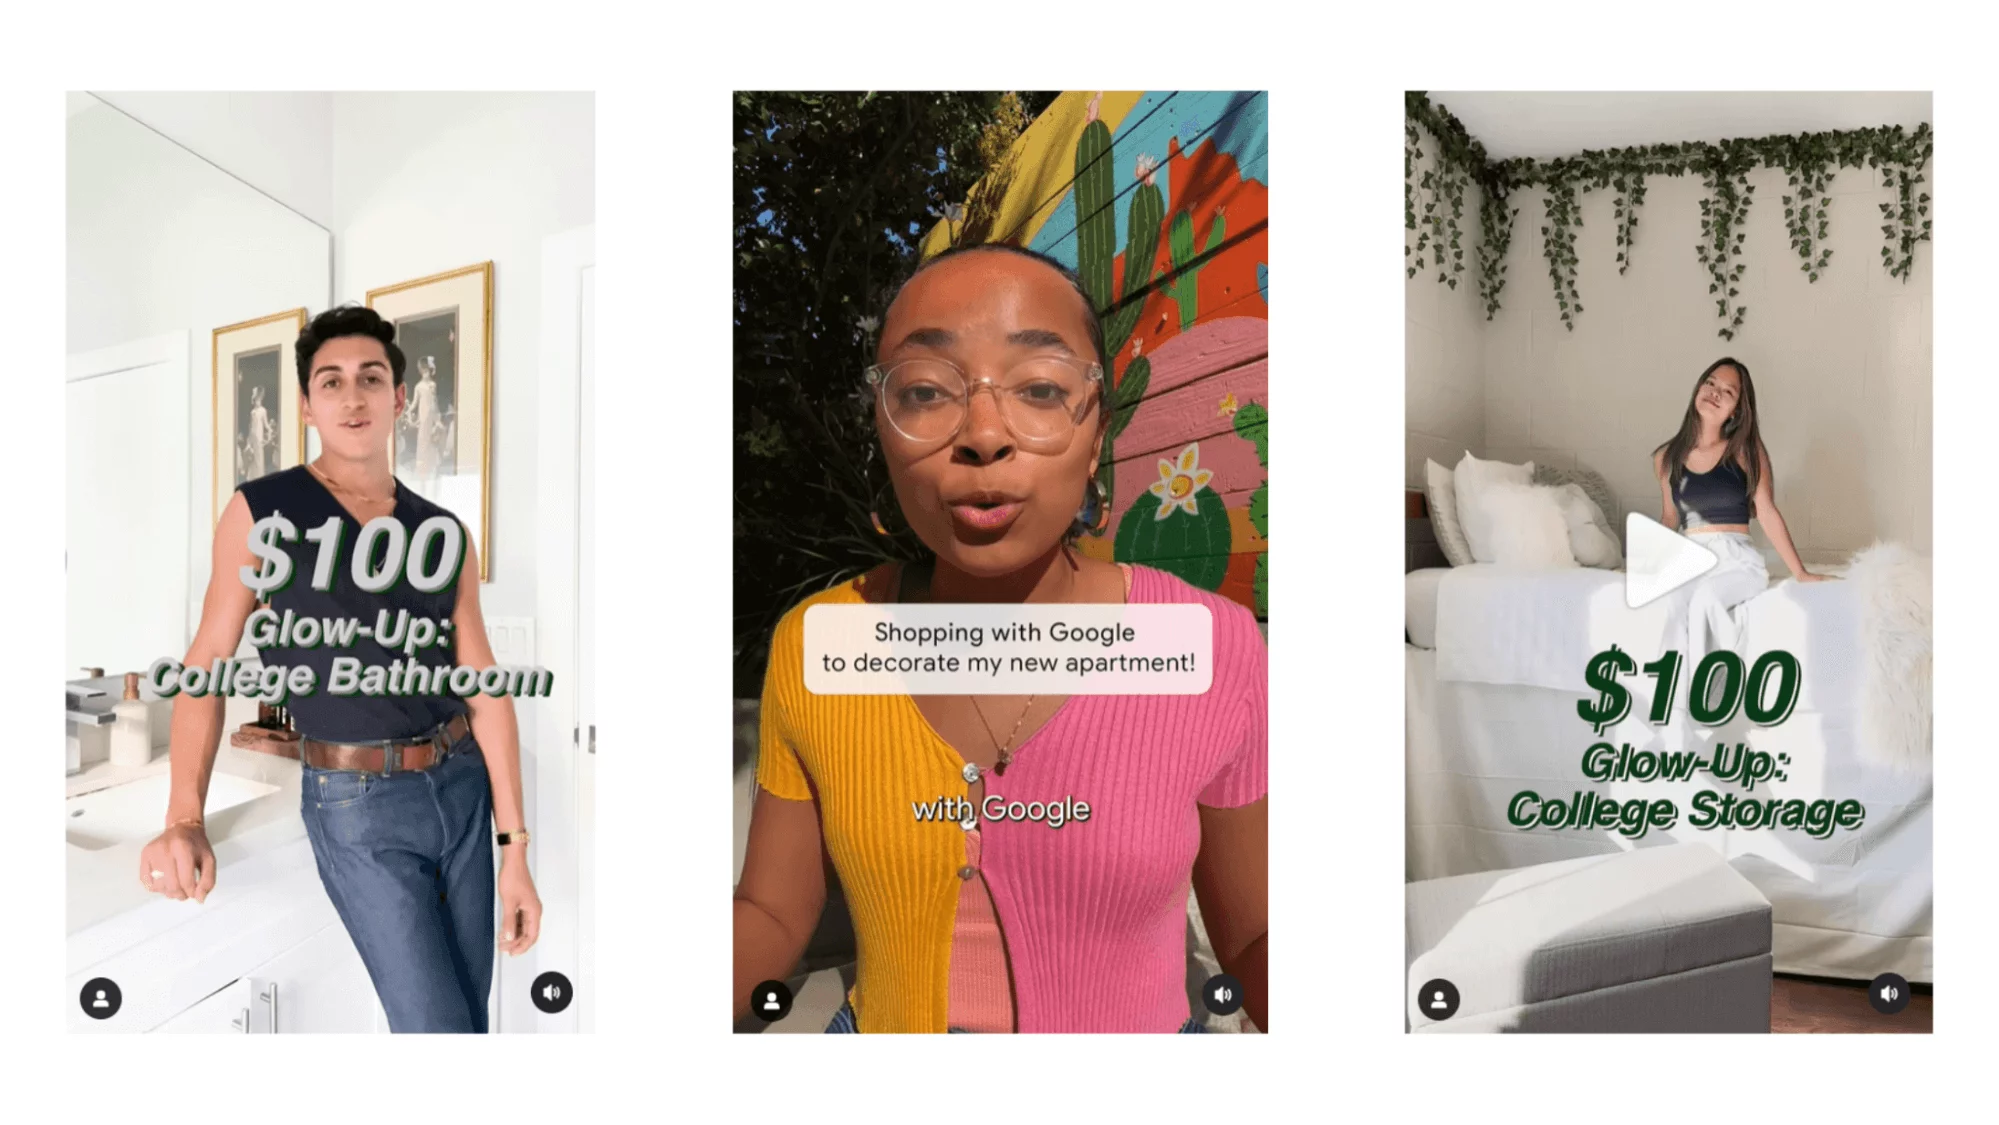 Collage with three glow-up campaign videos on Shop with Google of creators: @bennyrebecca, @taylorcassidyj, @camillepenick